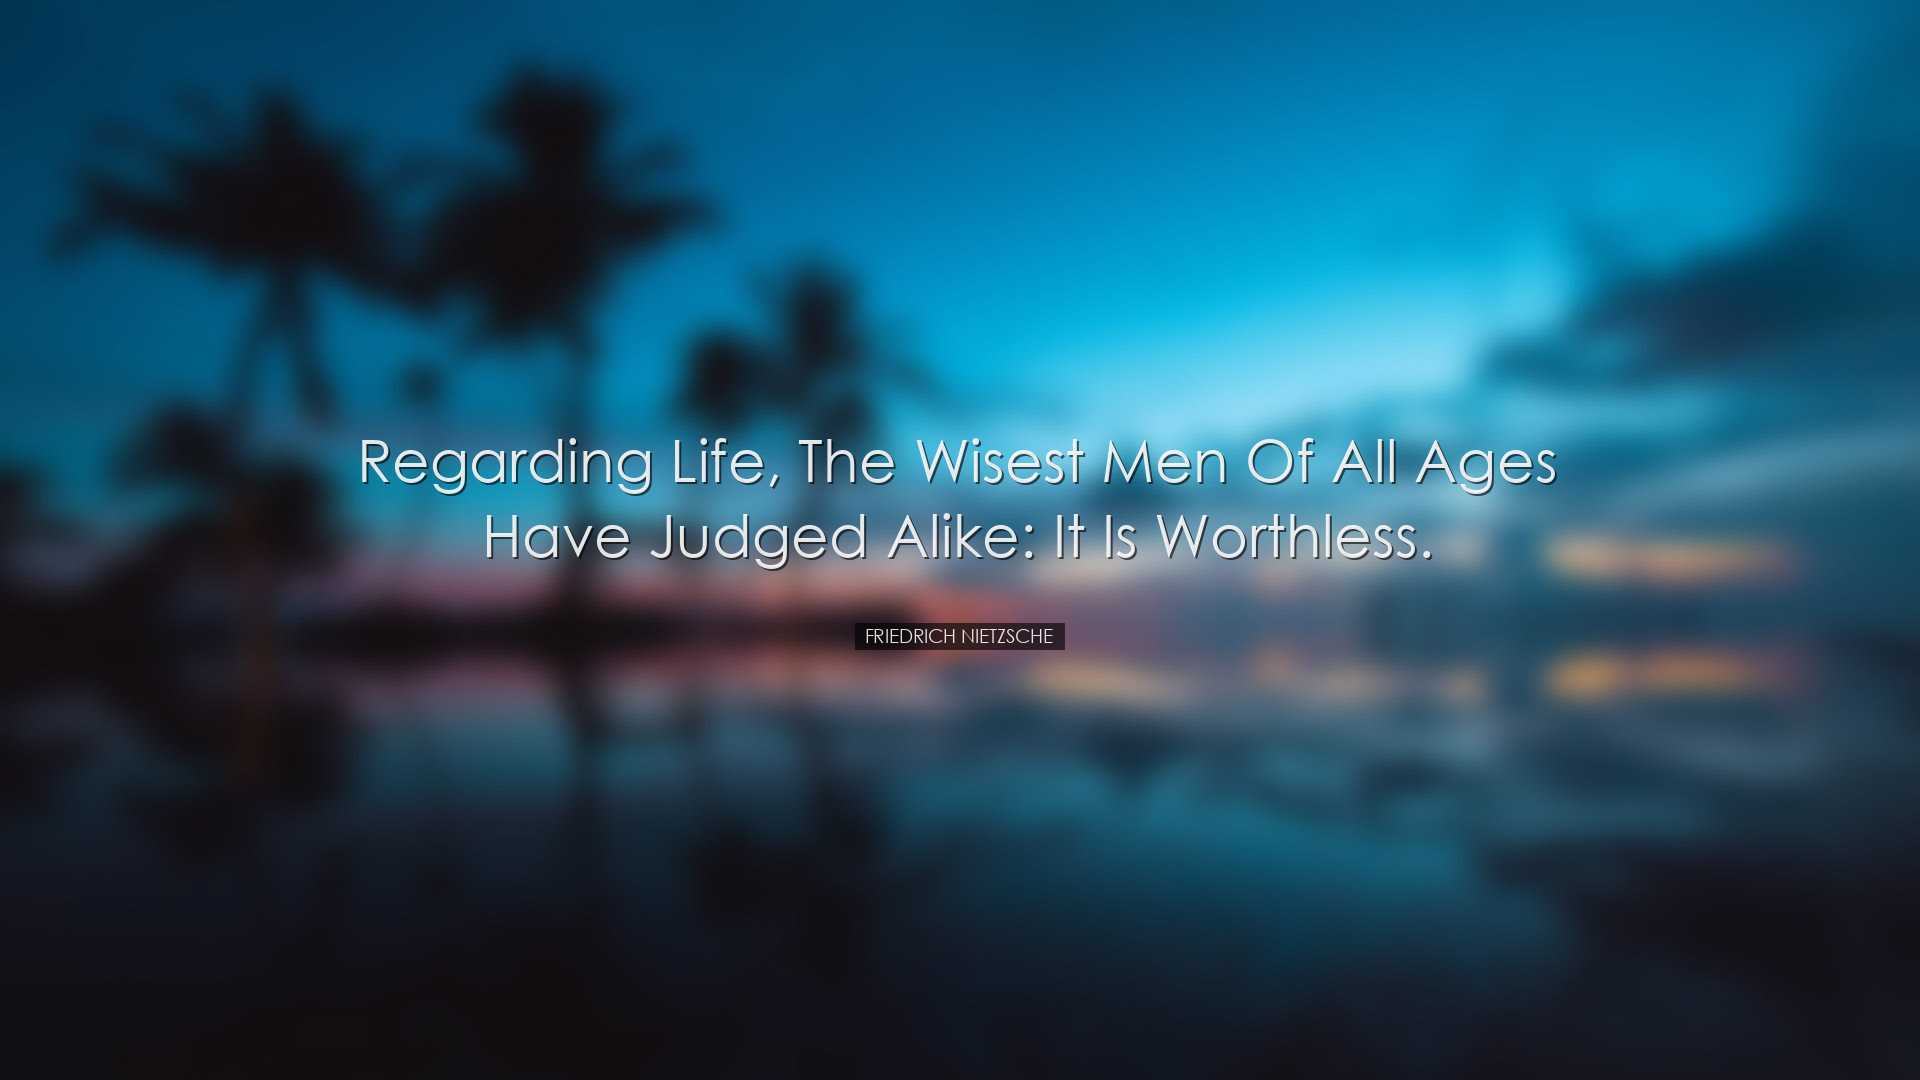 Regarding life, the wisest men of all ages have judged alike: it i